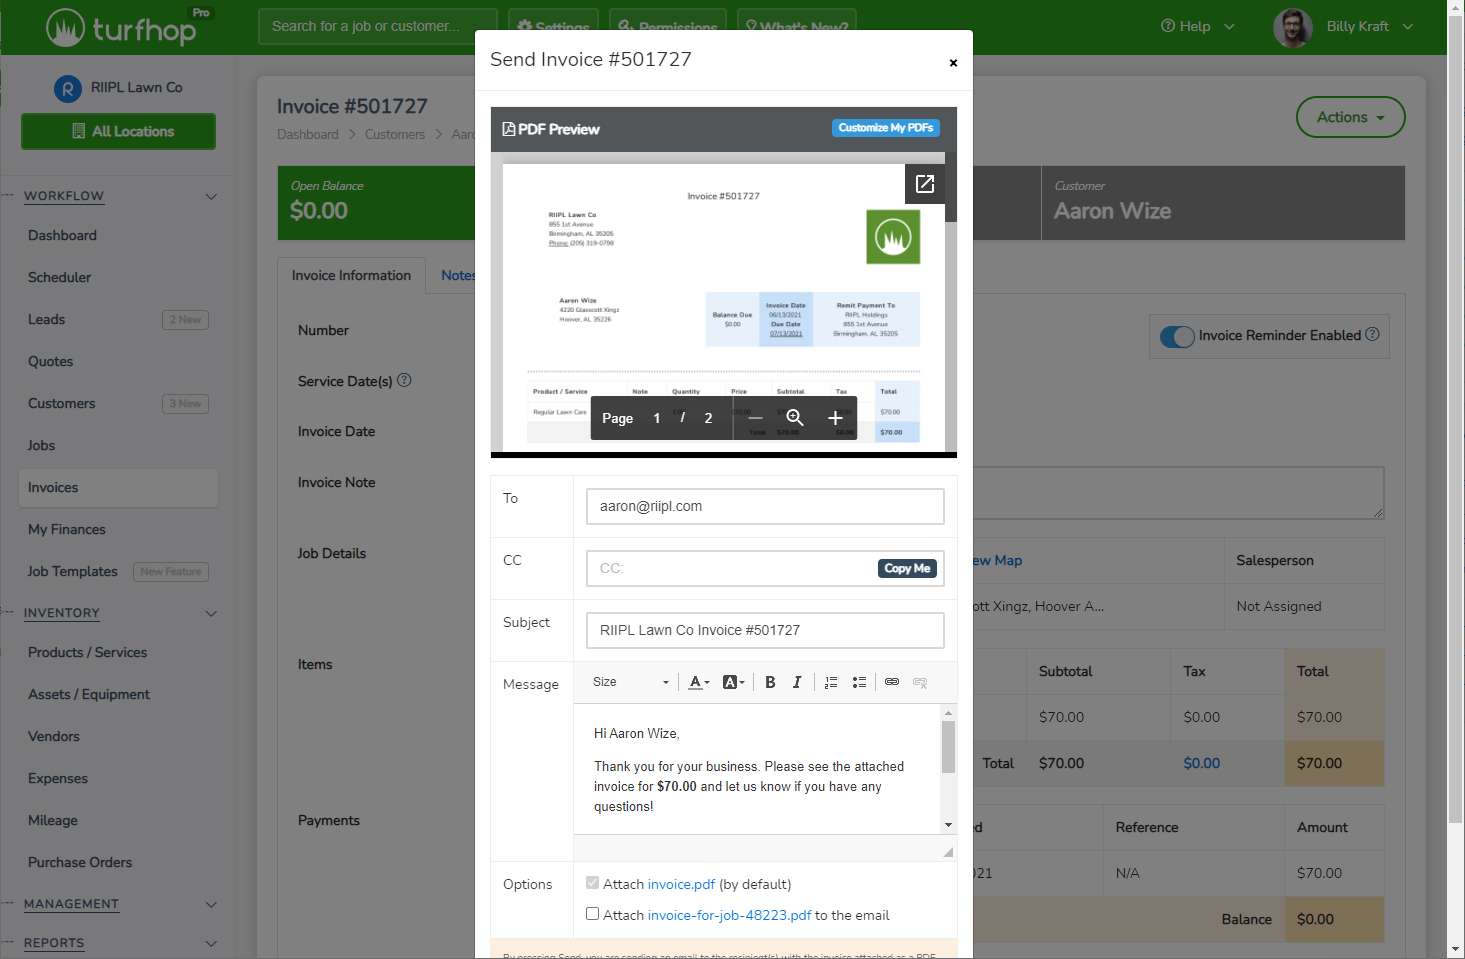 Send Invoices Via Email and Text Message - Preview and customize your PDFs before sending invoices to your customers